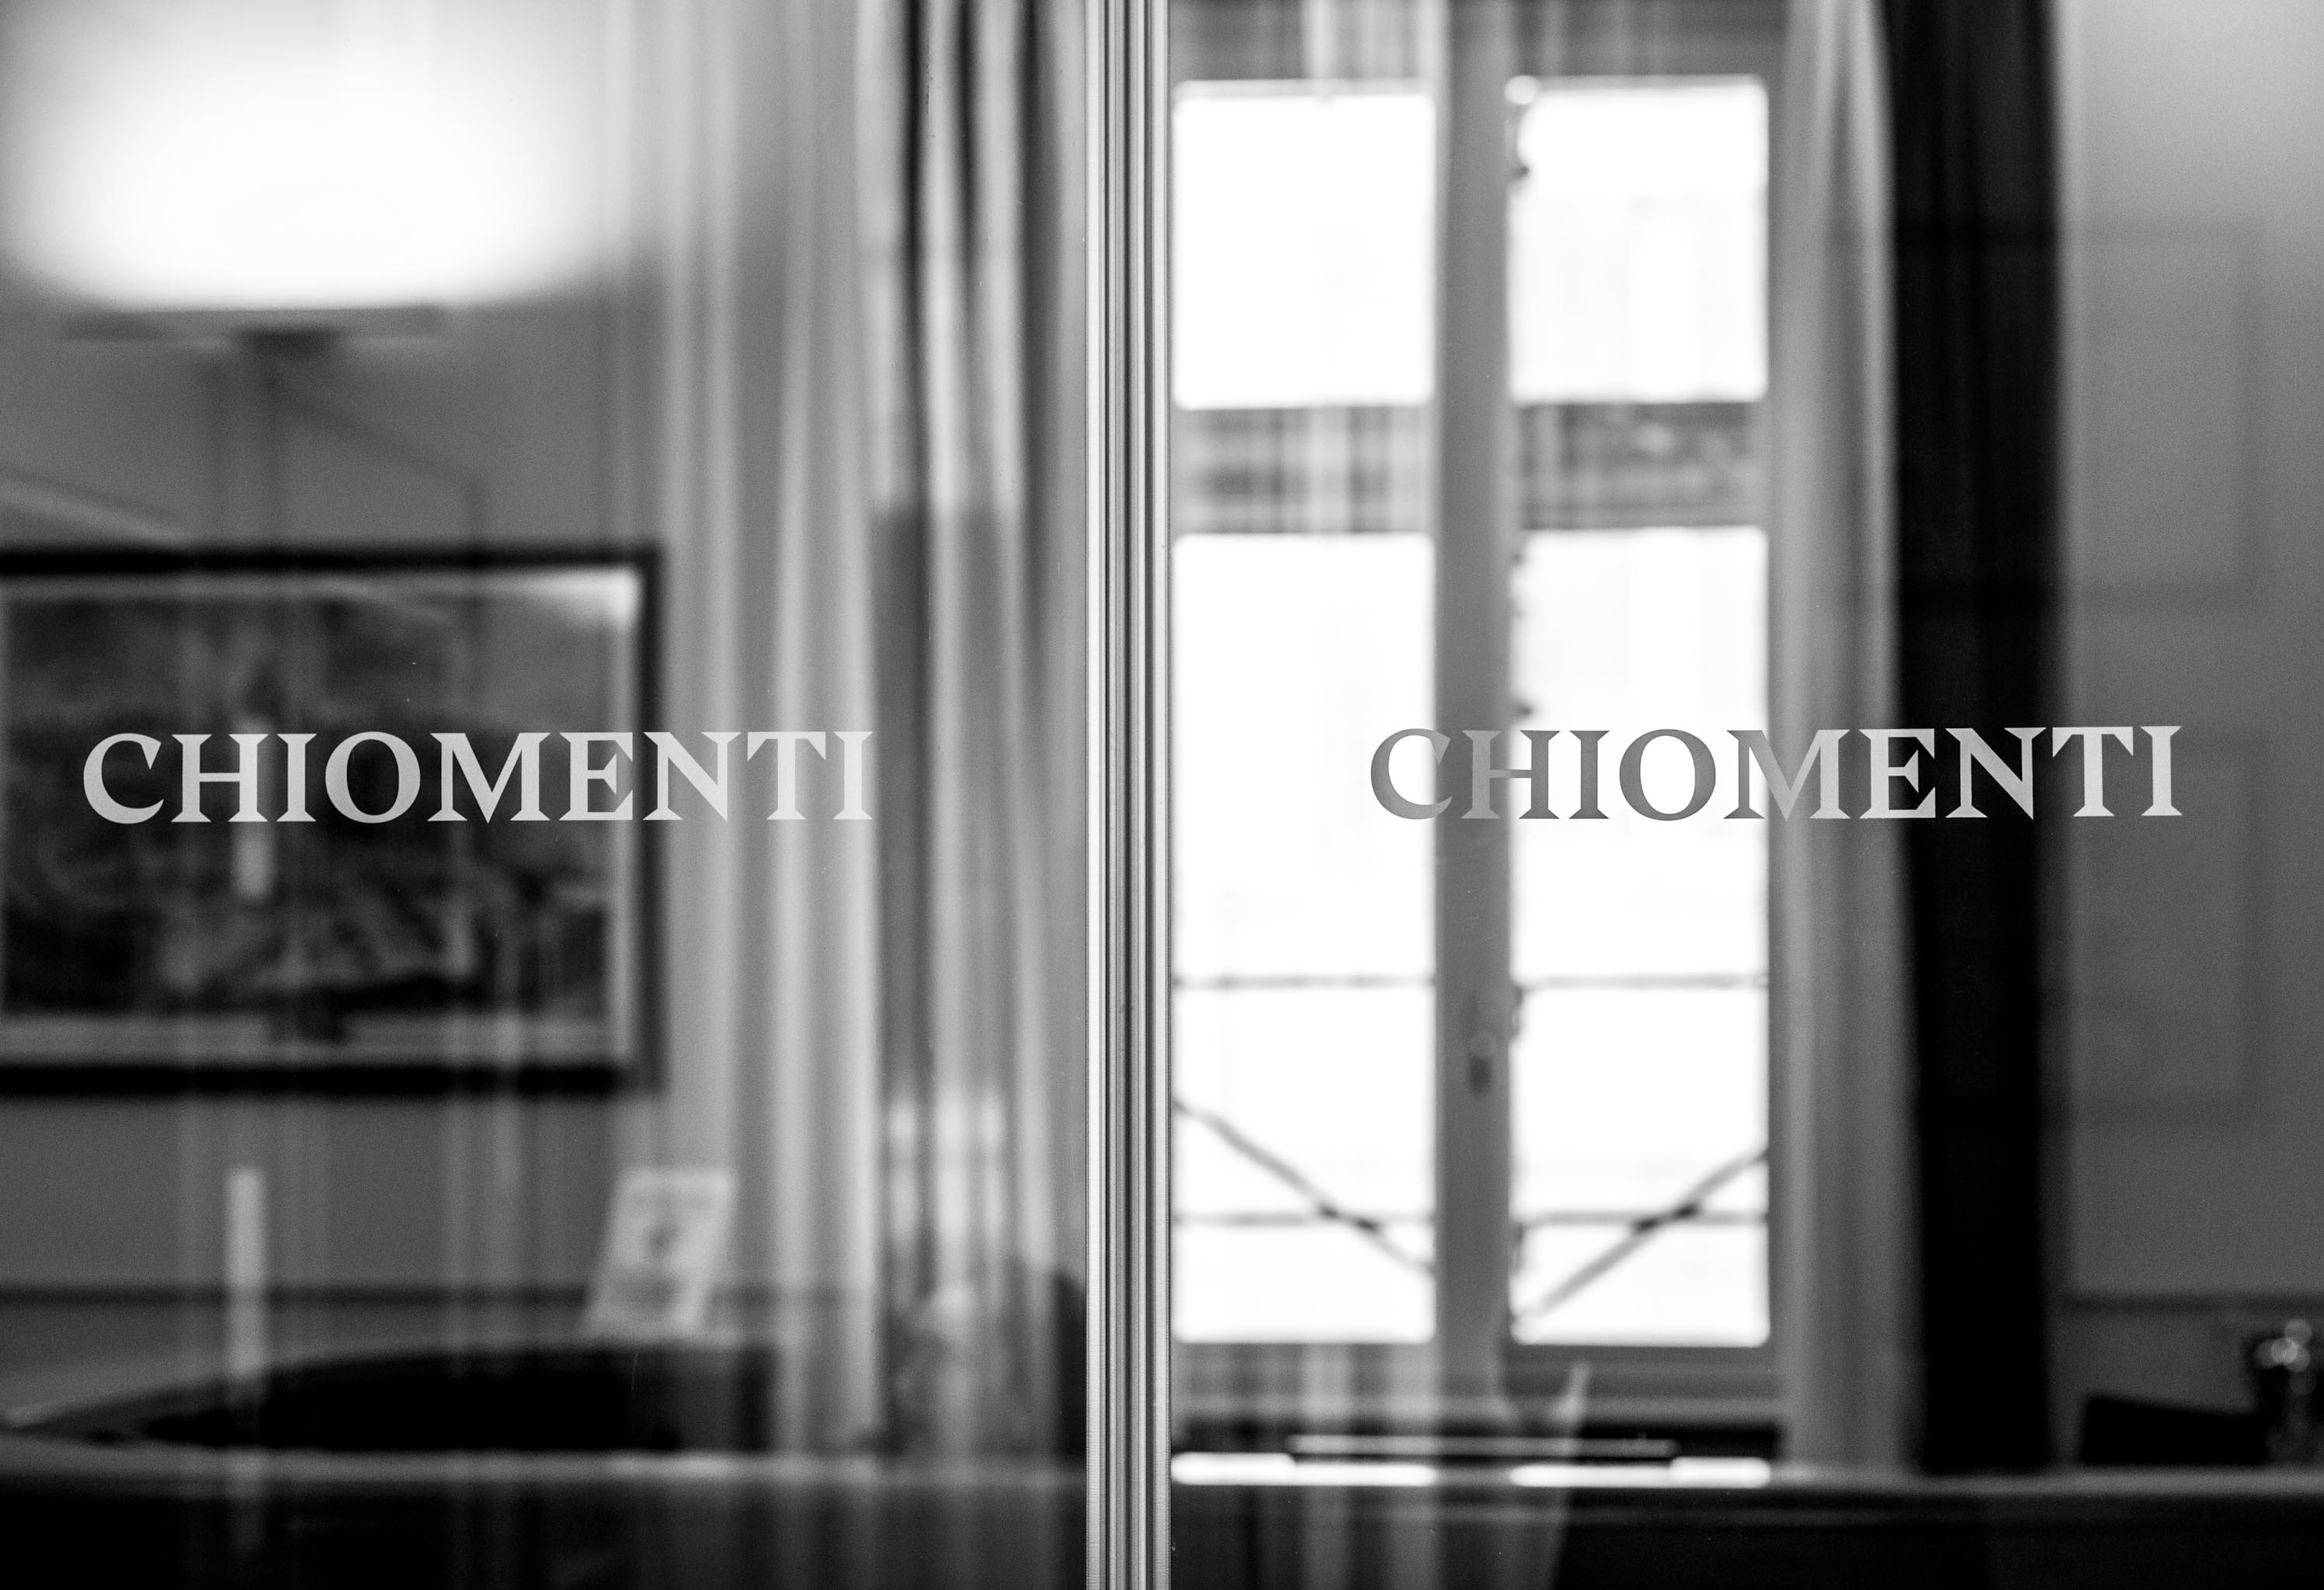 Chiomenti strengthens and consolidates its leadership in finance and financial institutions advisory